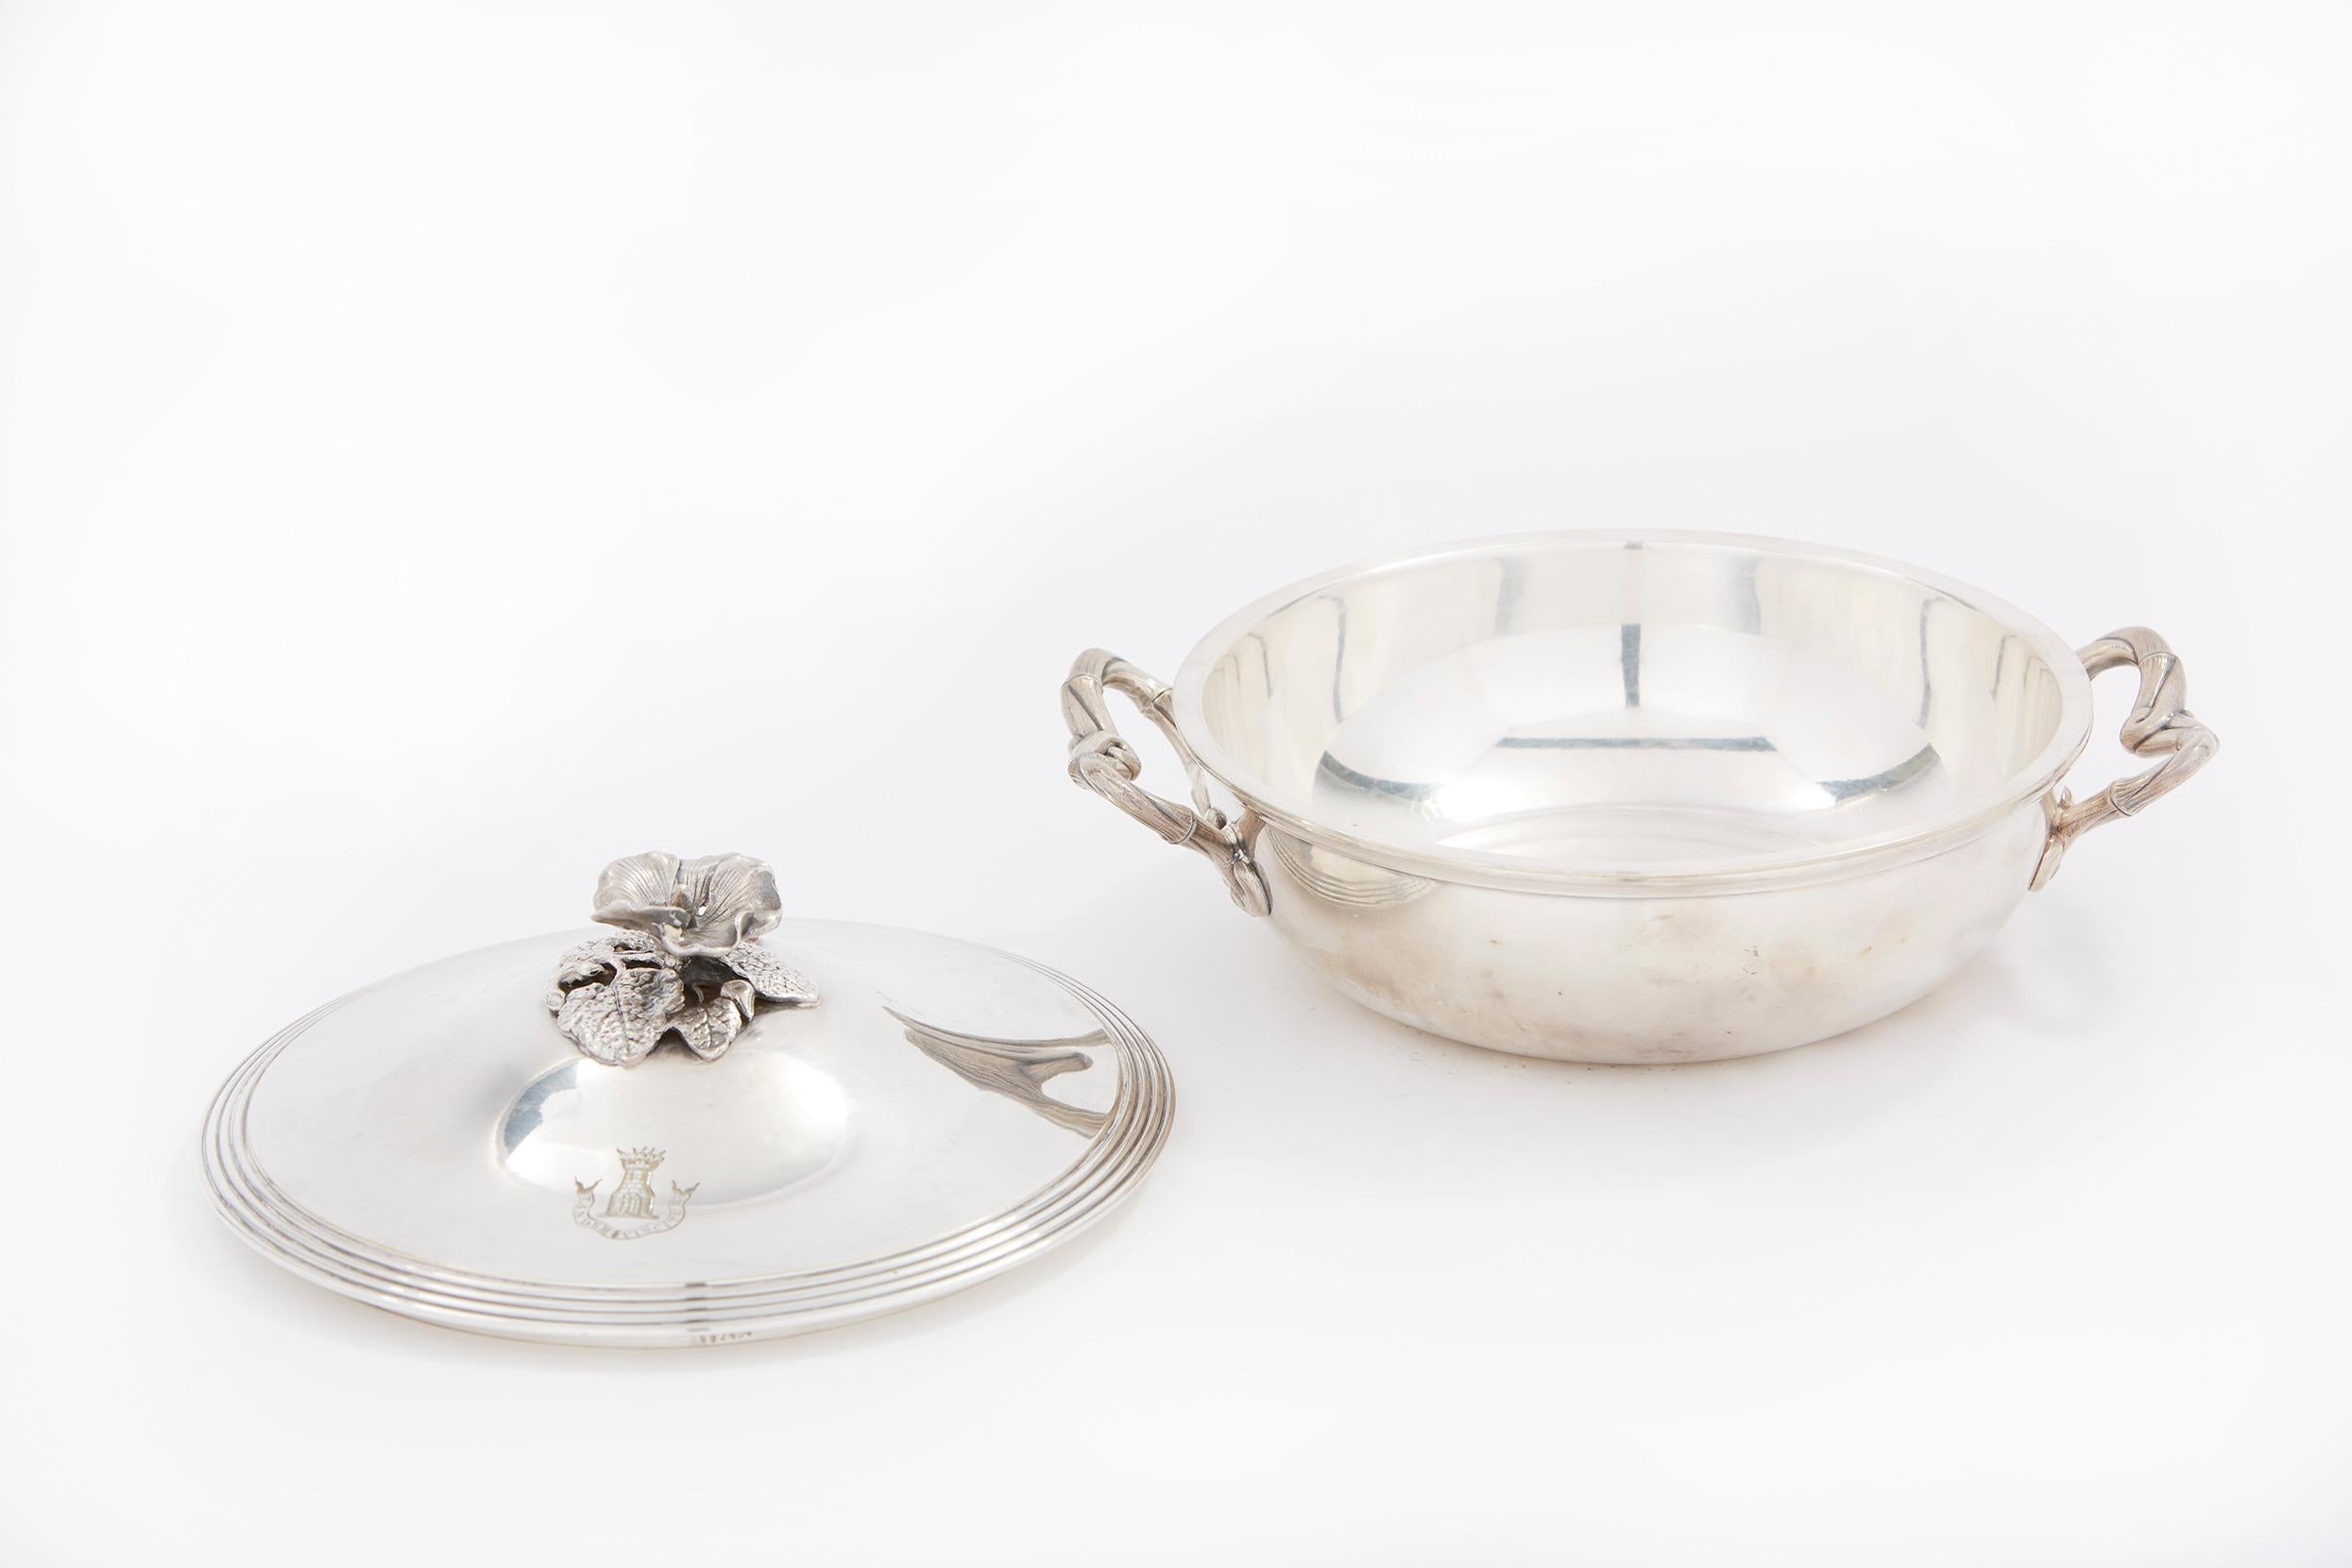 Elegant and refined French silver plated tableware covered dish / serving piece with side handles and exterior design details. The dish is in great condition. Minor wear consistent with age / use. Numbered & mark undersigned. The tureen stands about